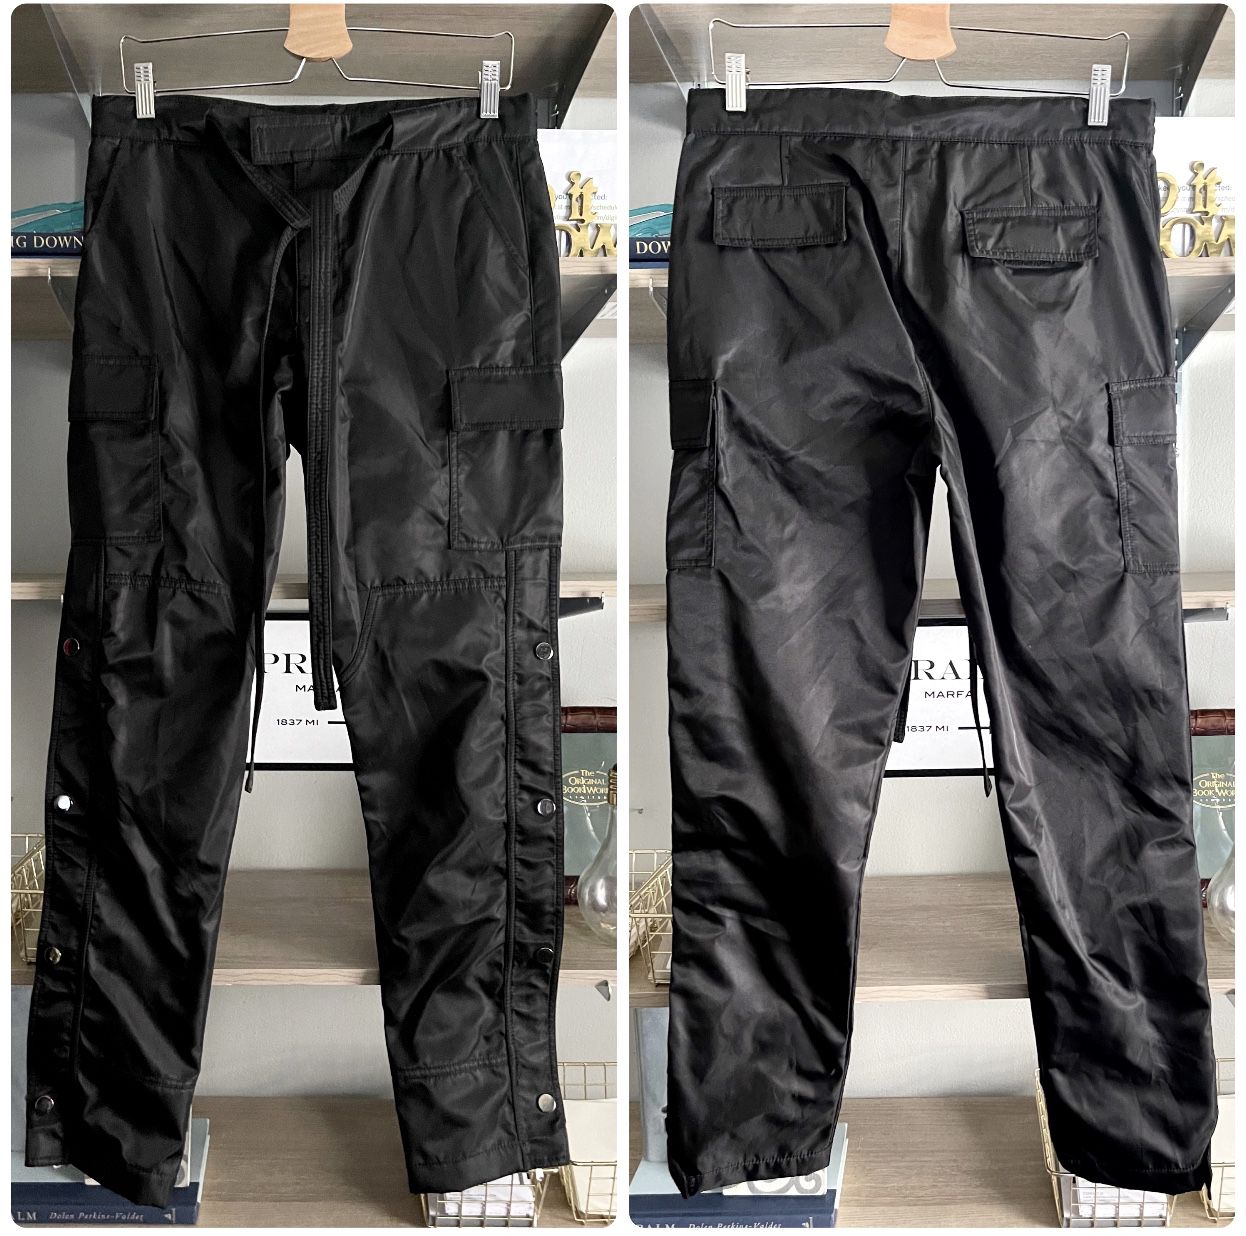 New! Mens Alpha Dog satin Snap Cargo Pants Retail $200 Size M. Designed with a blend of 3 fabrics, with cargo pockets at the side seam, 4 snap closure